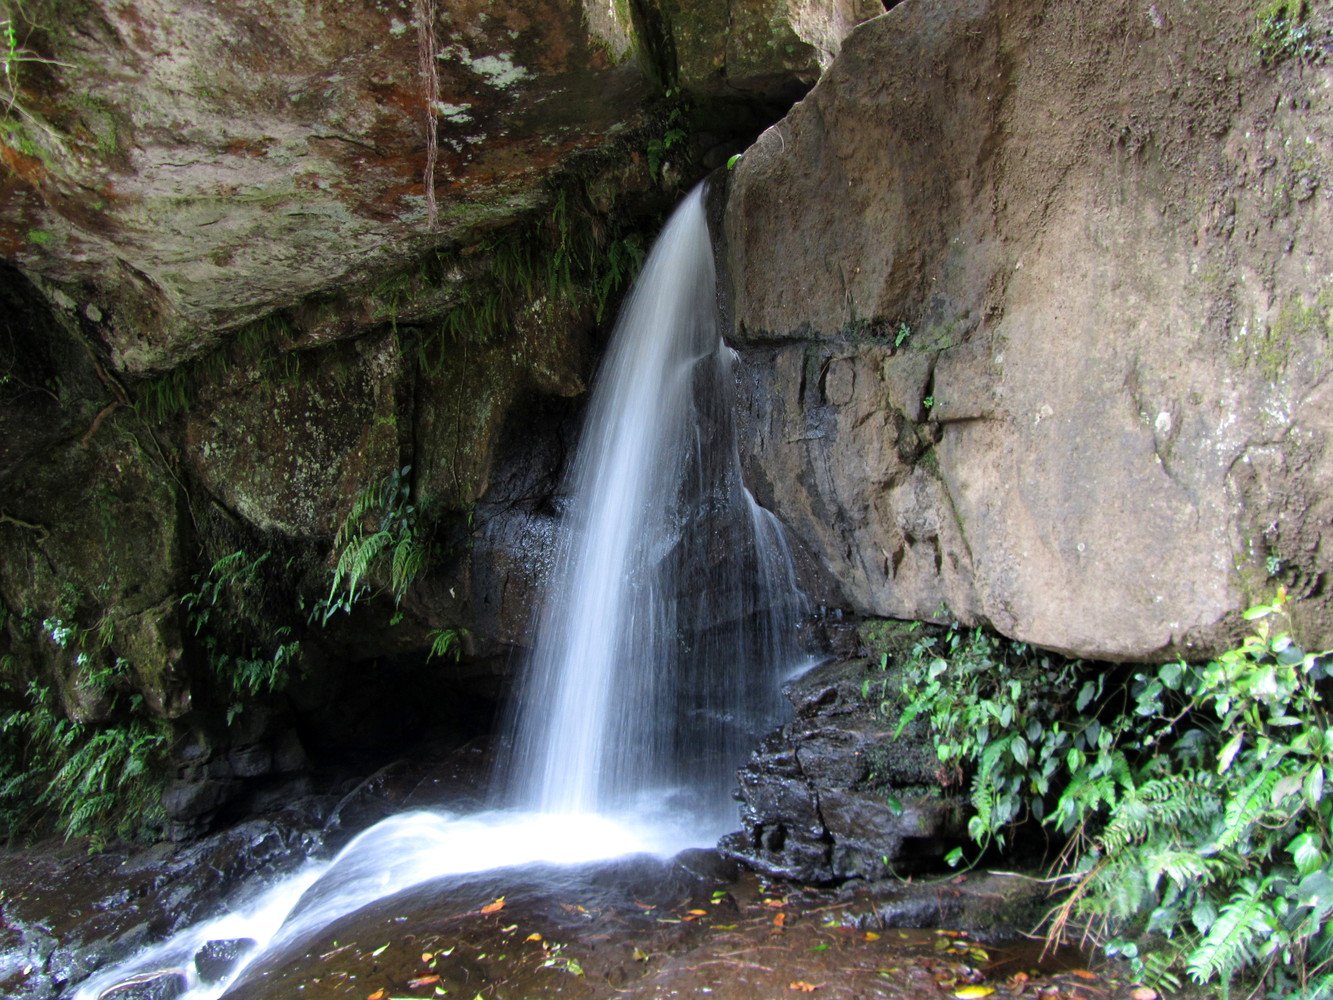 A waterfall with a stream of water escaping from a gap between rocks